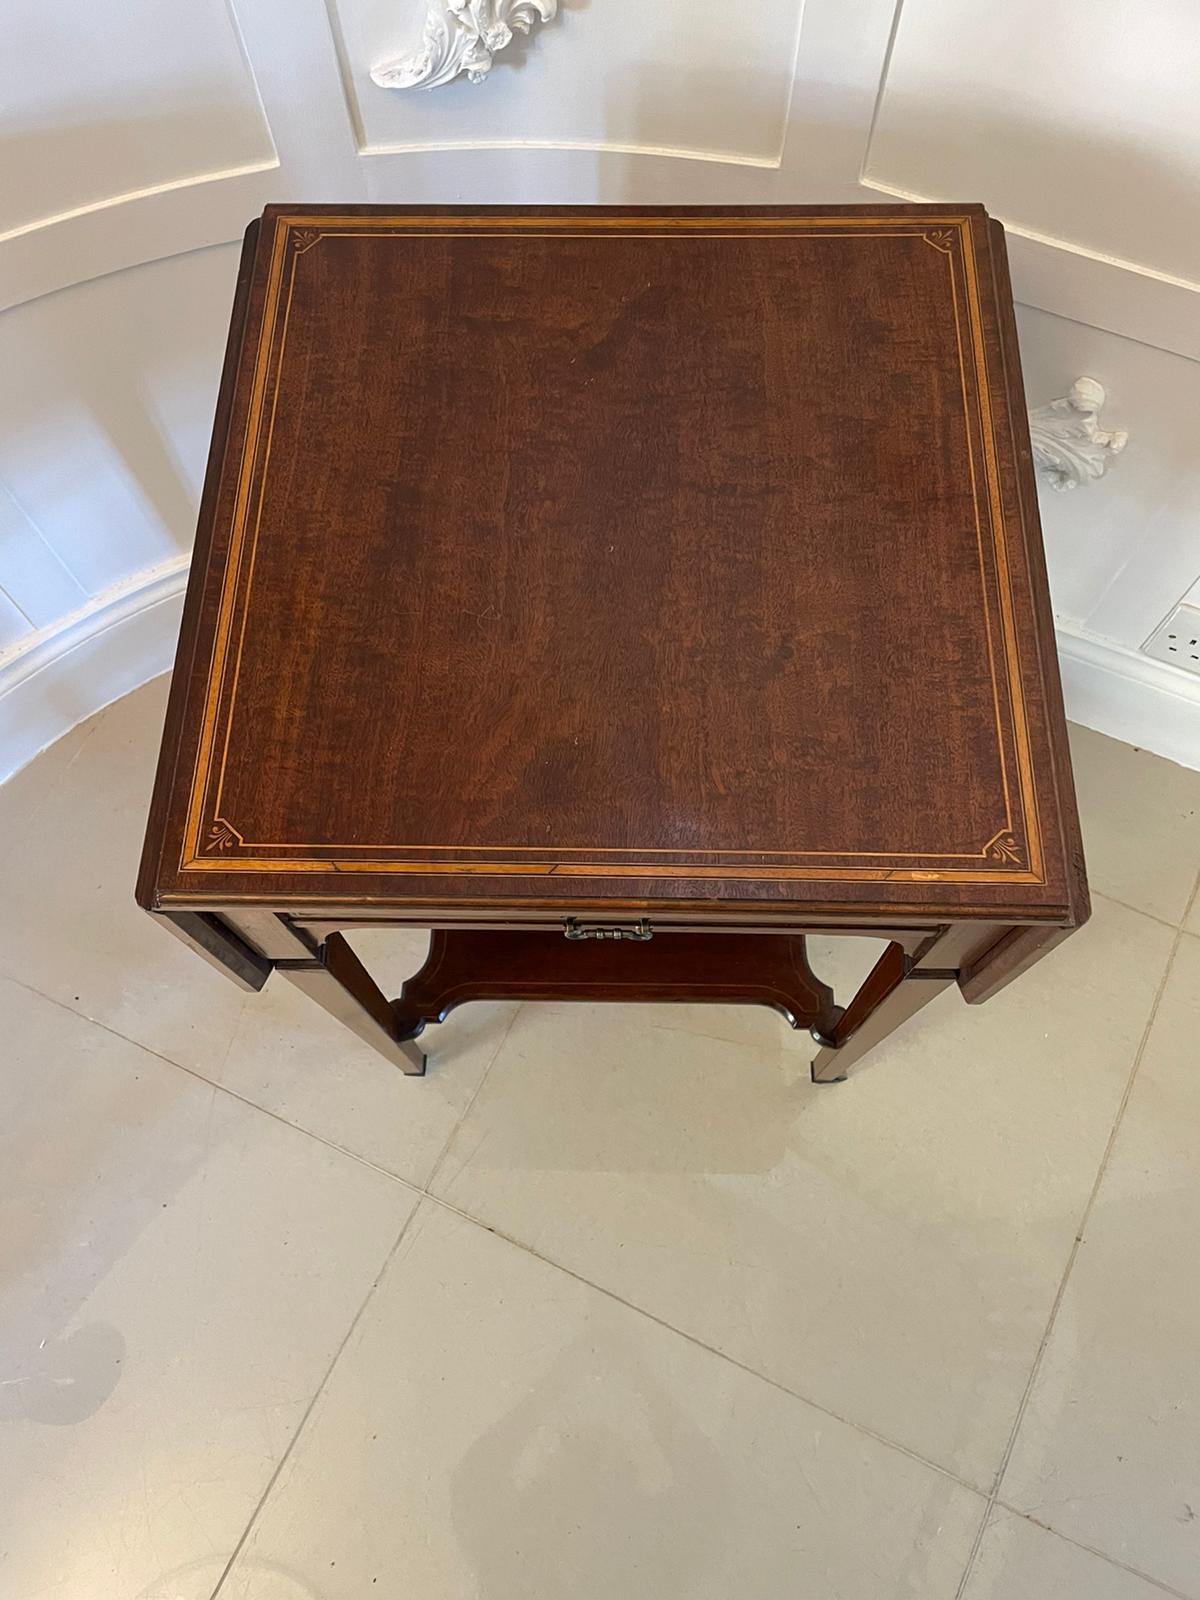 Fine Quality Antique Edwardian Inlaid Mahogany Occasional/Lamp Table For Sale 4